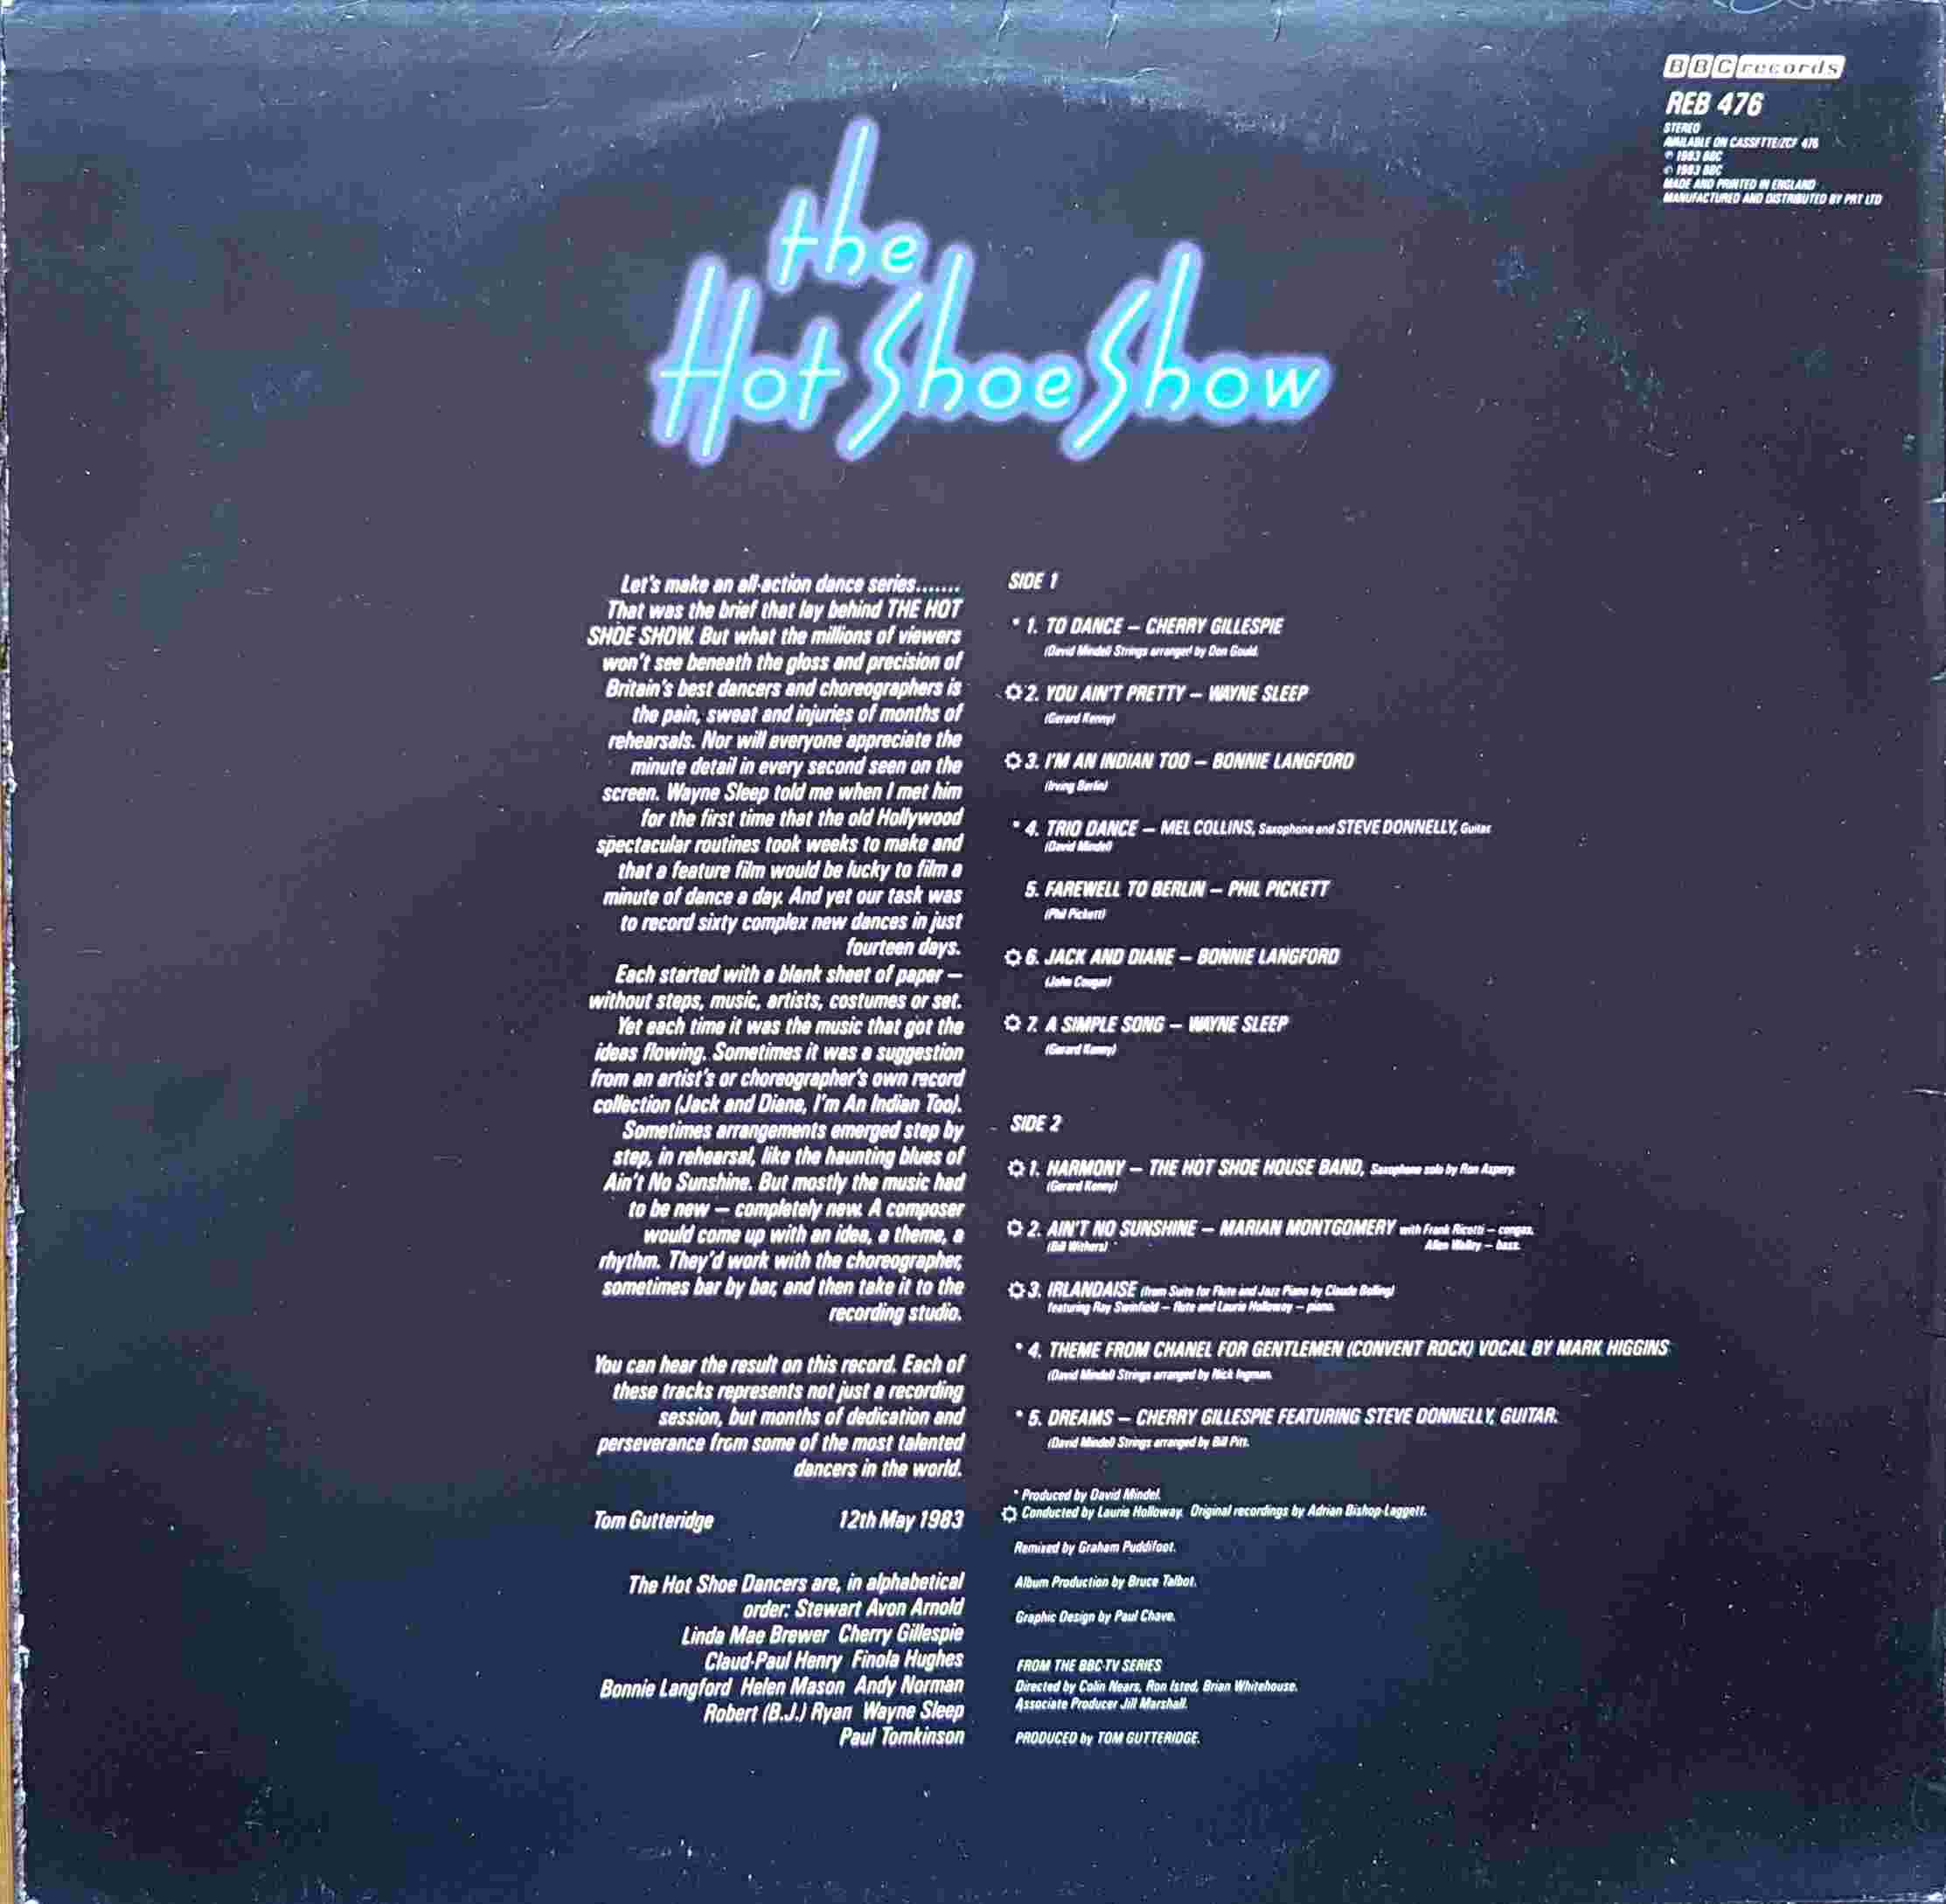 Picture of REB 476 The hot shoe show by artist Various from the BBC records and Tapes library